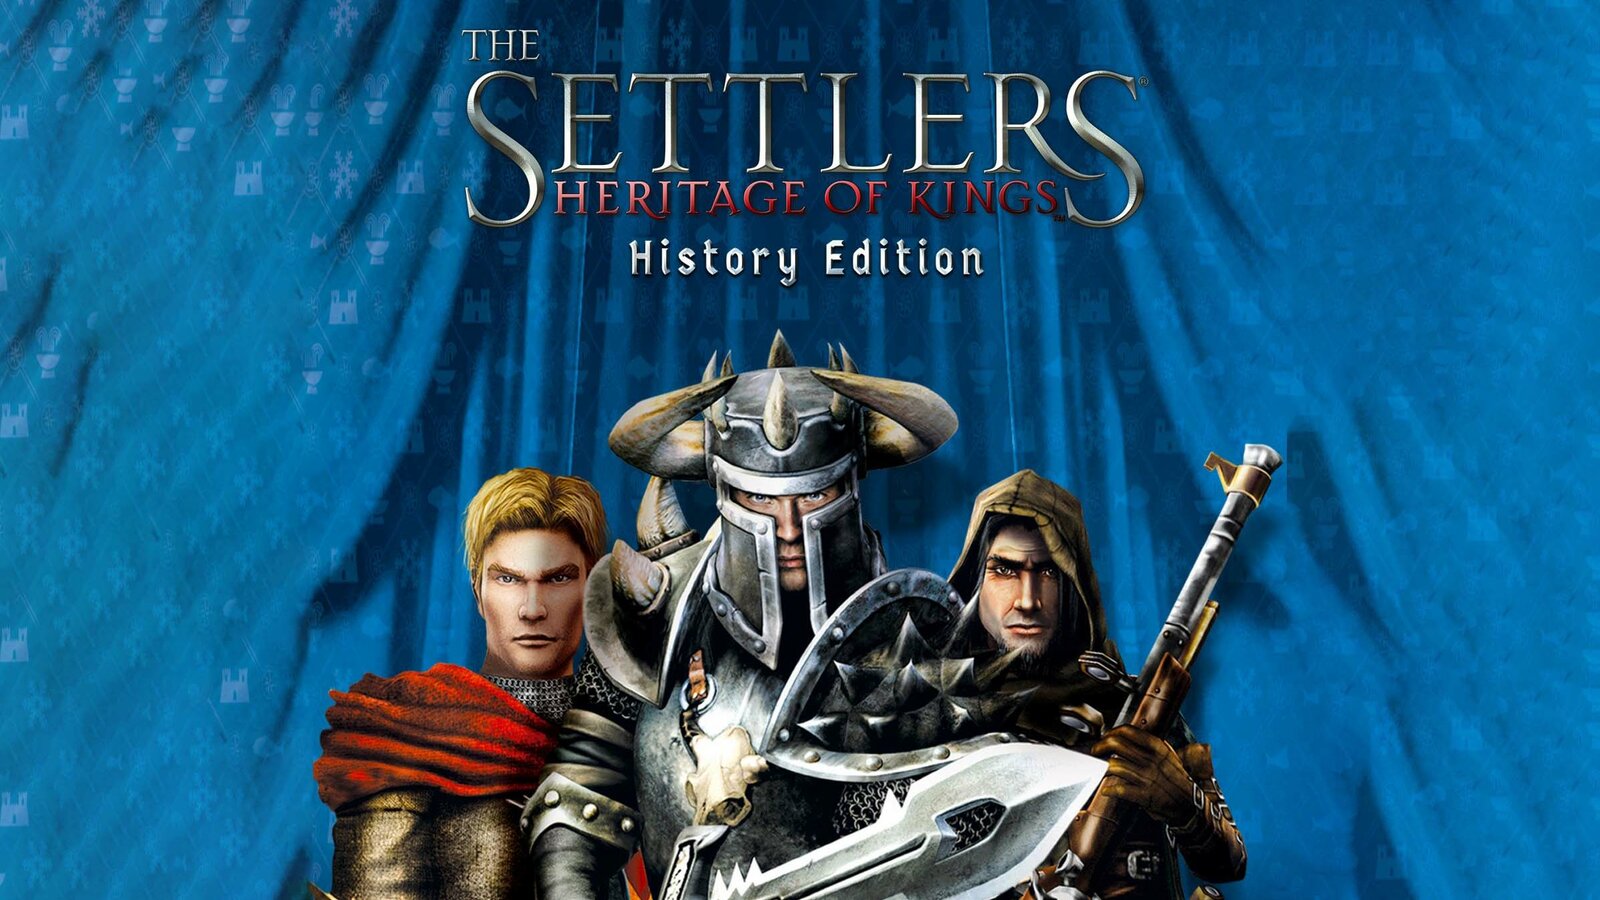 The Settlers: Heritage of Kings - History Edition